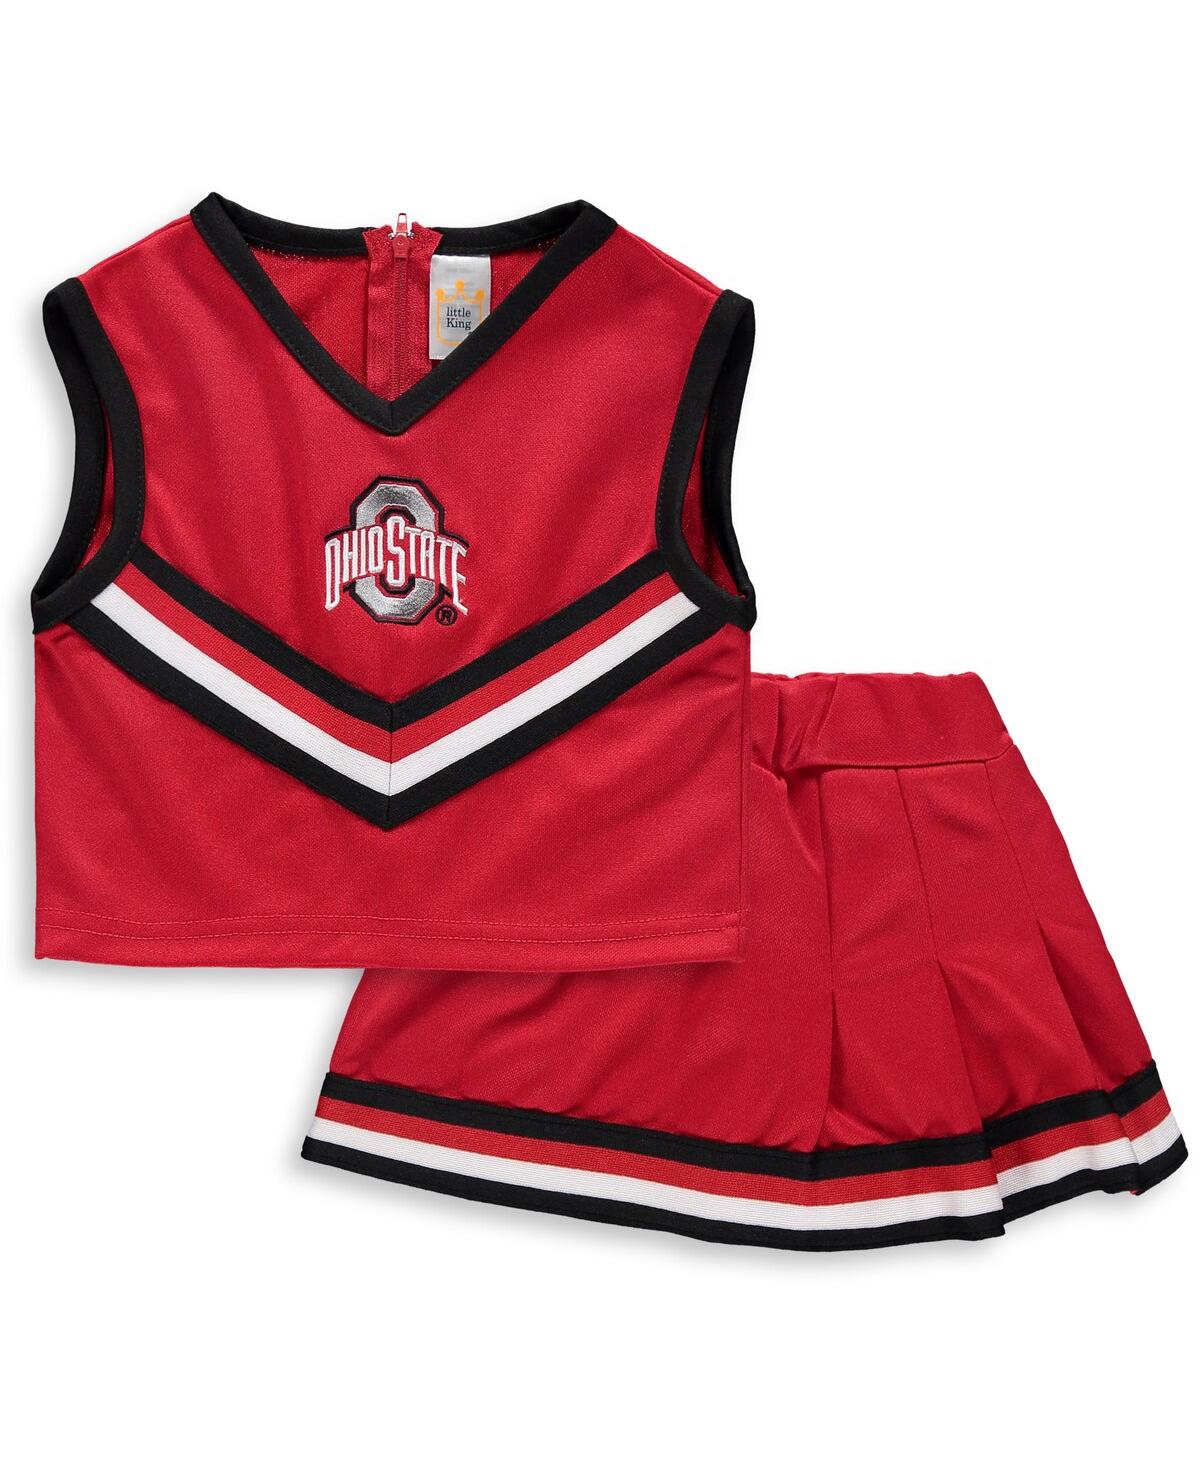 Little King Apparel Babies' Toddler Girls Scarlet Ohio State Buckeyes Two-piece Cheer Set